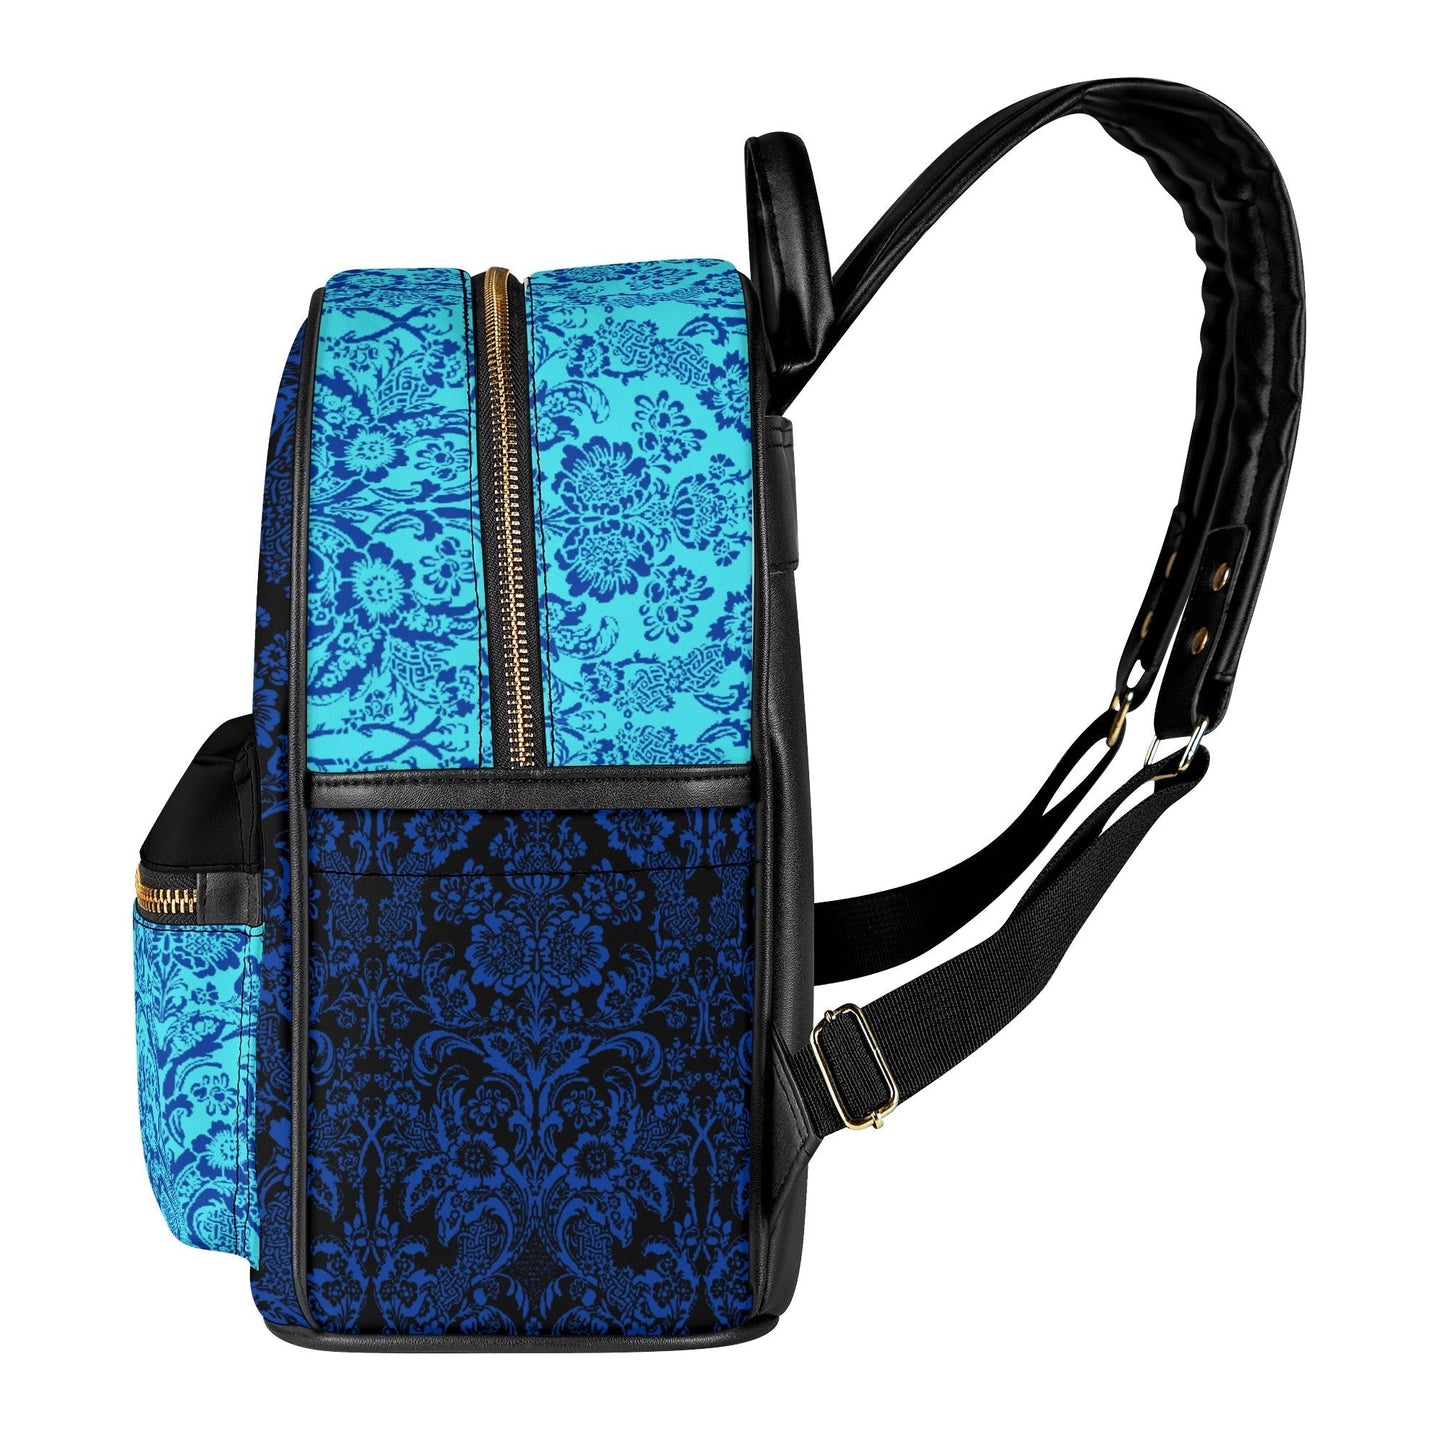 Stand out  with the  Blue Lace Casual PU Backpack  available at Hey Nugget. Grab yours today!